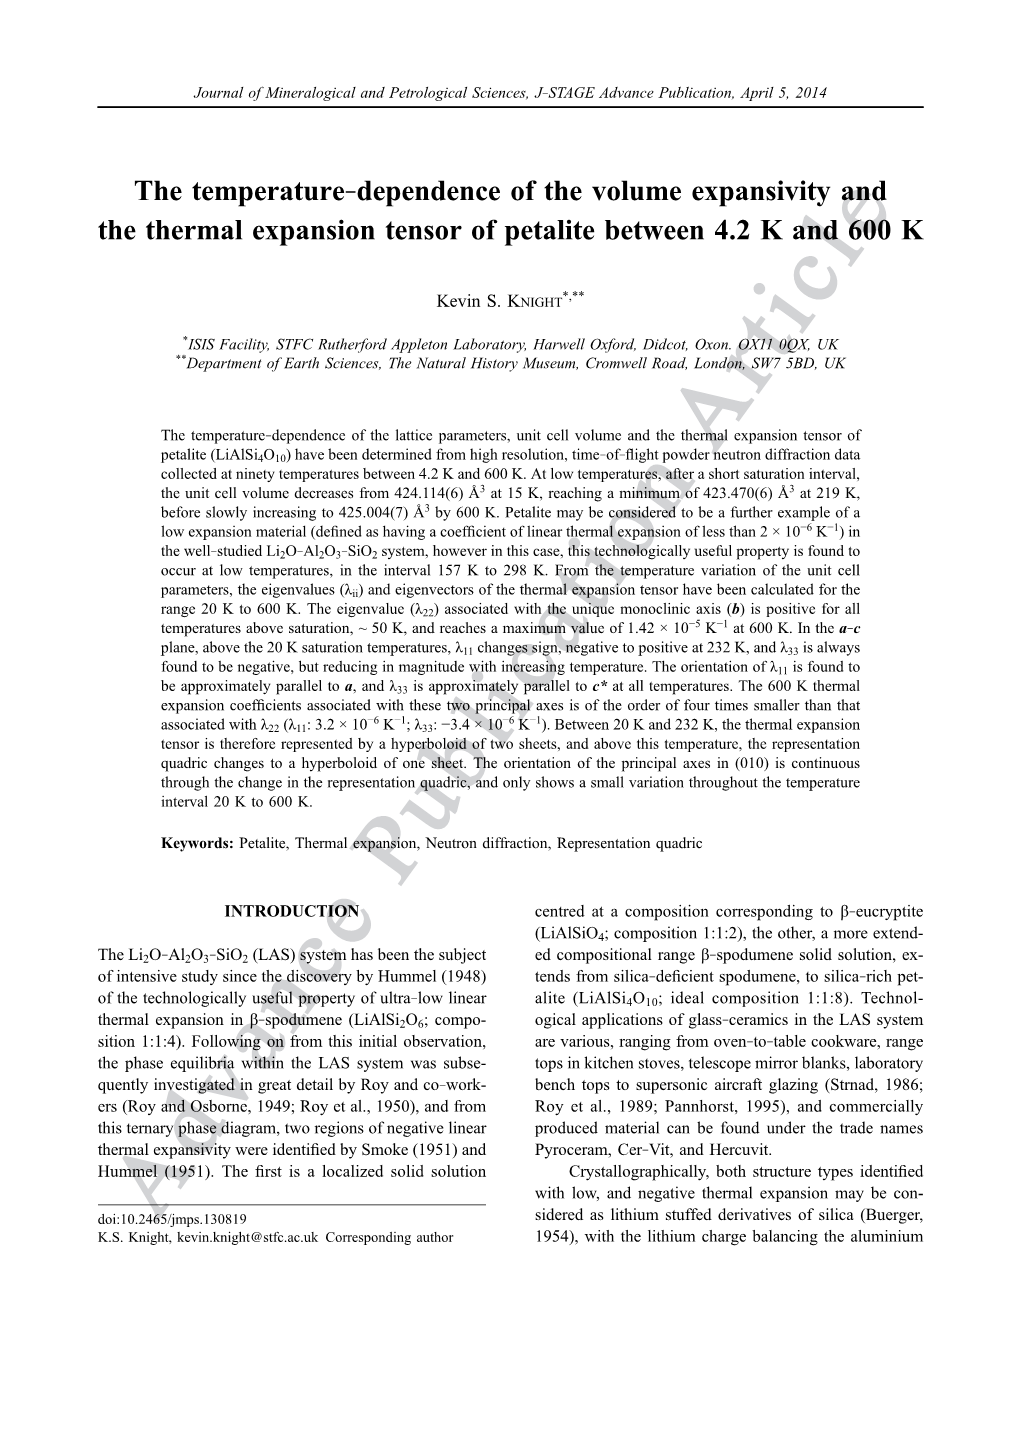 The Temperature–Dependence of the Volume Expansivity and the Thermal Expansion Tensor of Petalite Between 4.2 K and 600 K